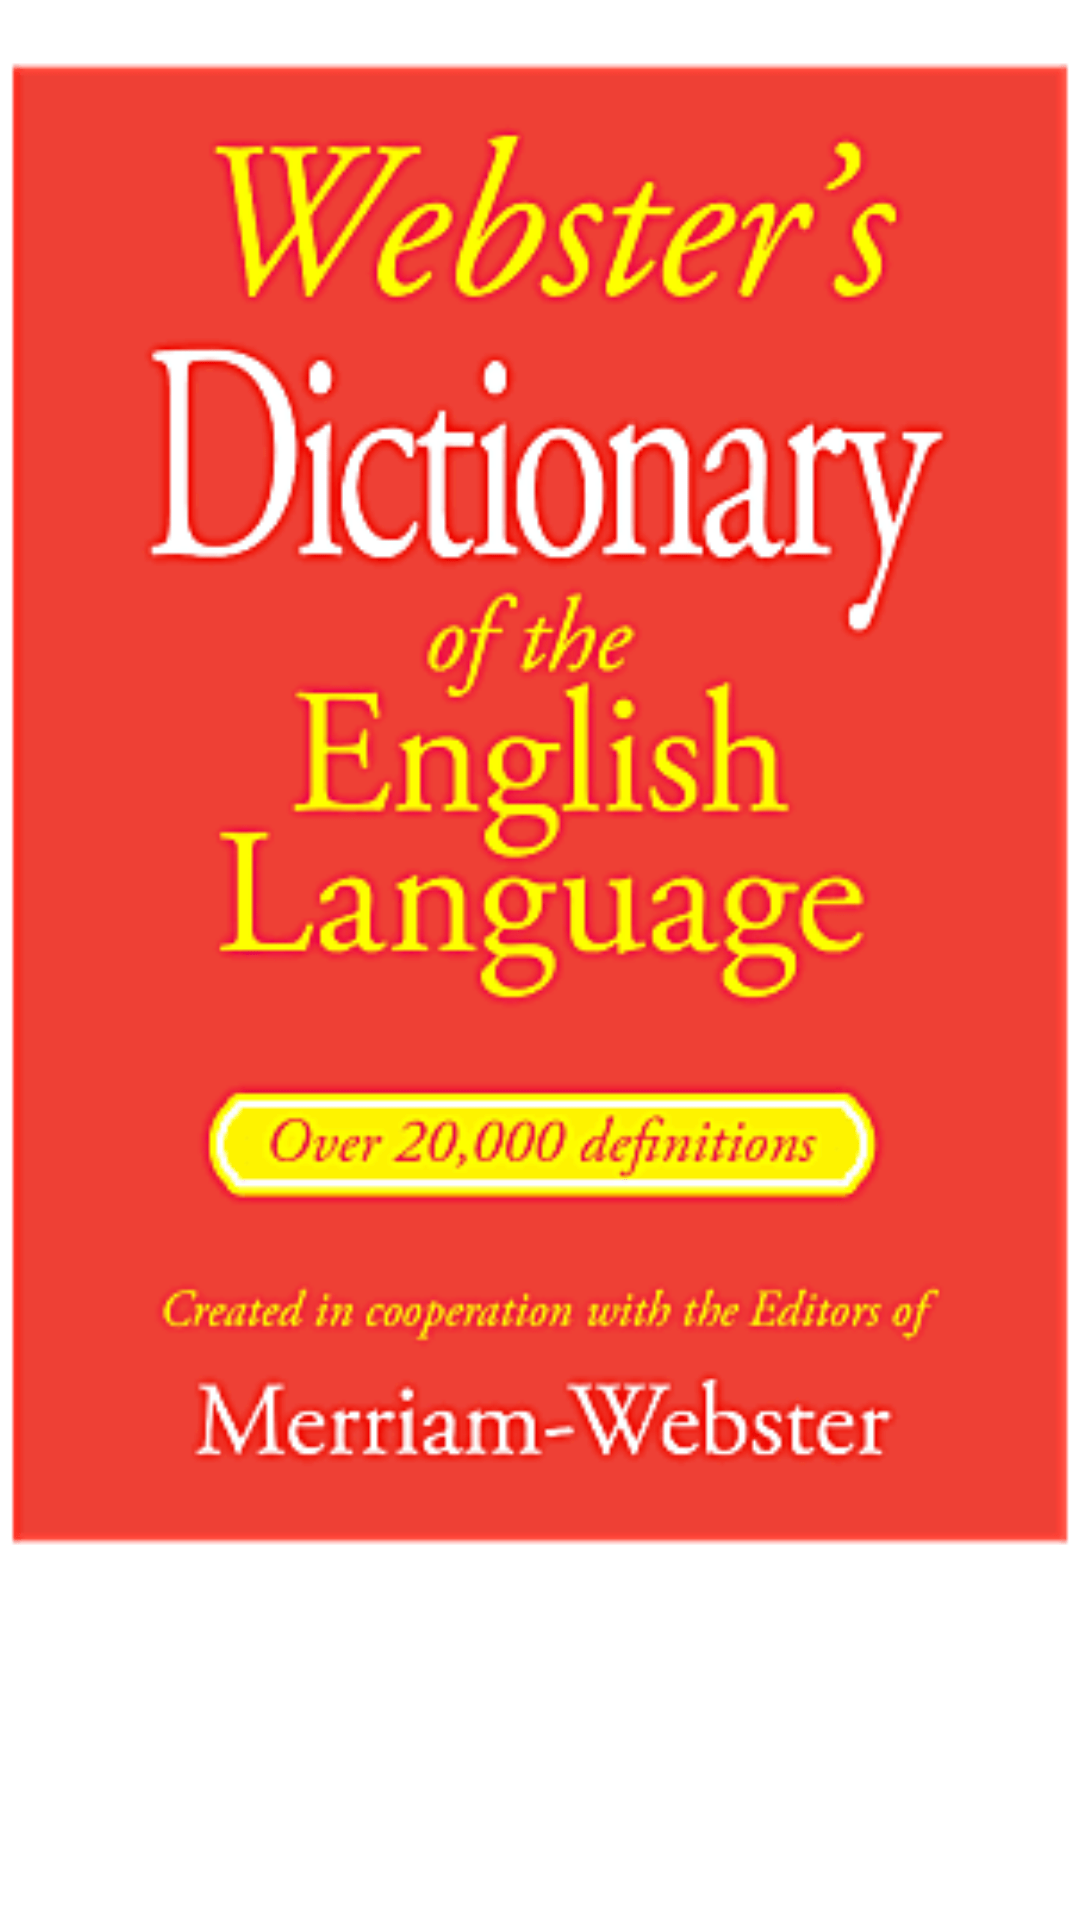 Webster's Dictionary of the English Language